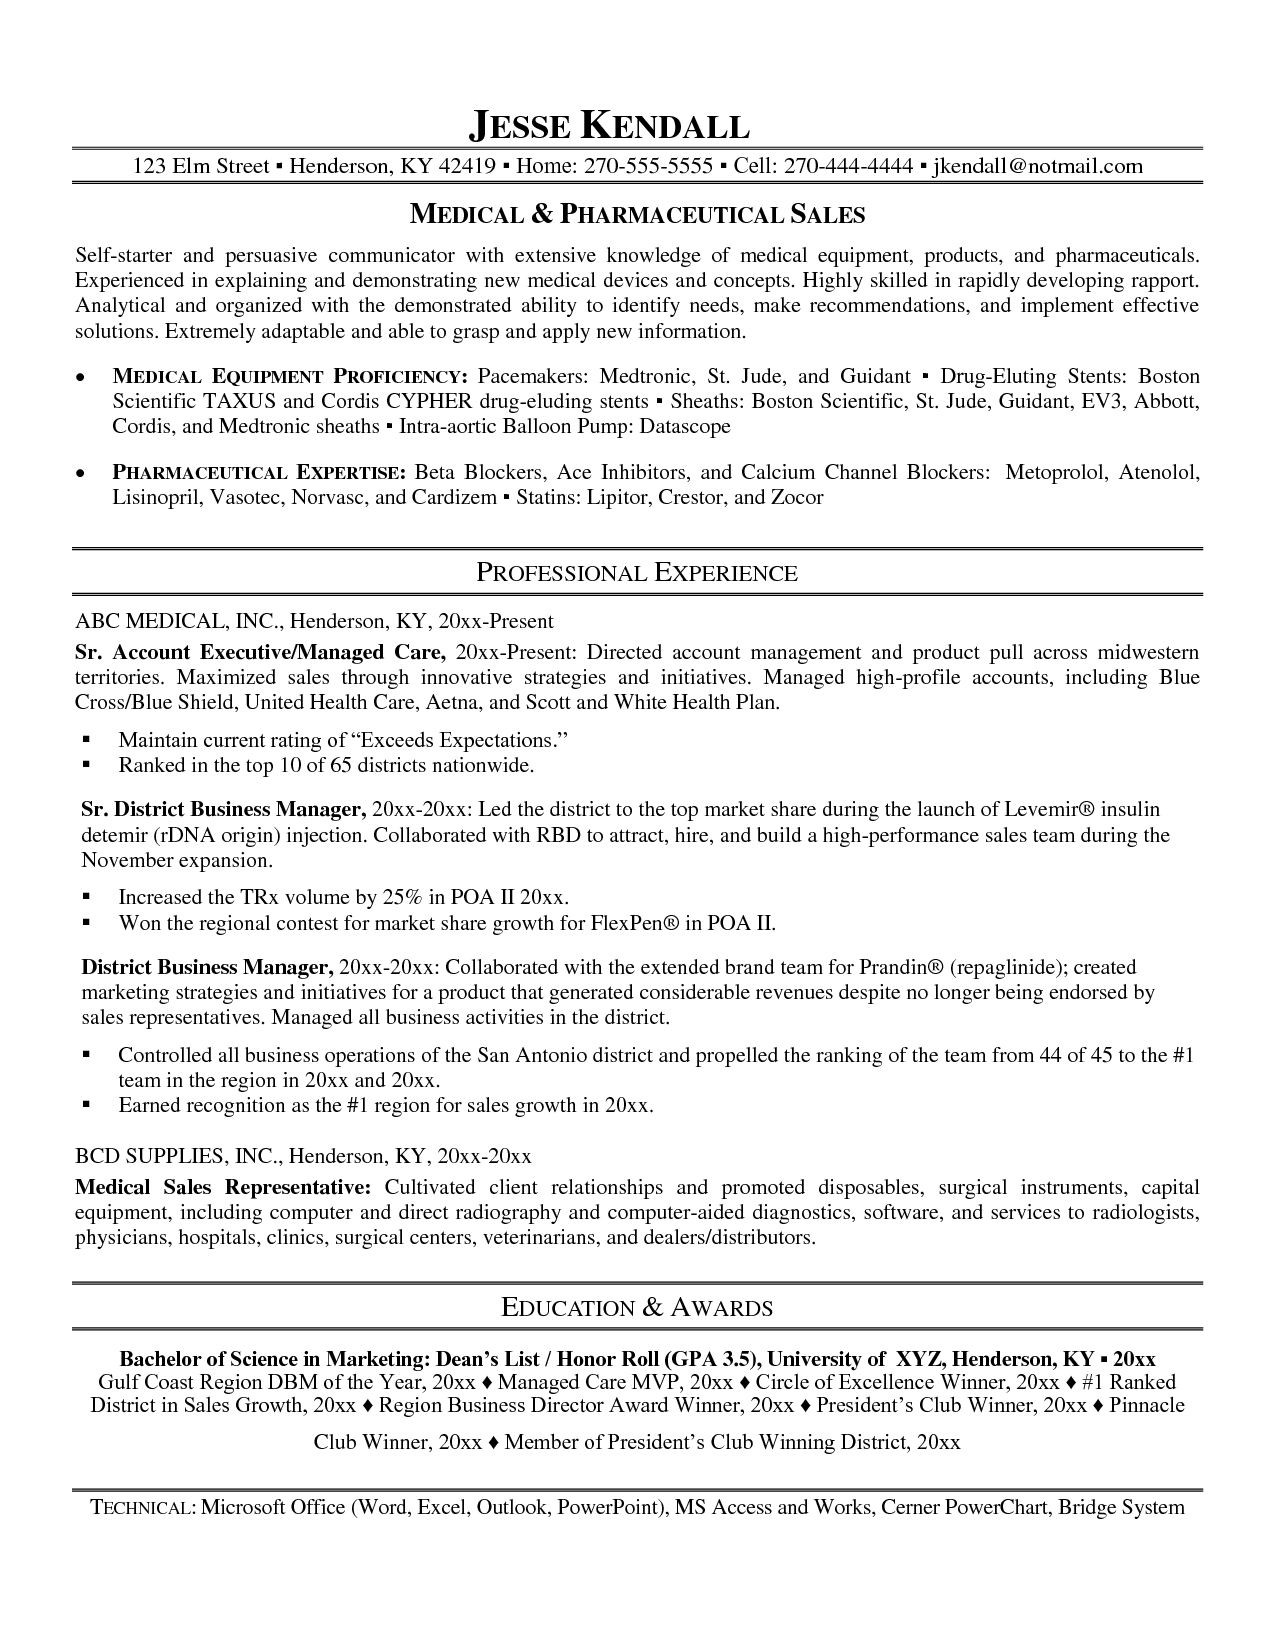 Sample Resume Objective Statements for Career Change Resume Objective for Career Change October 2021